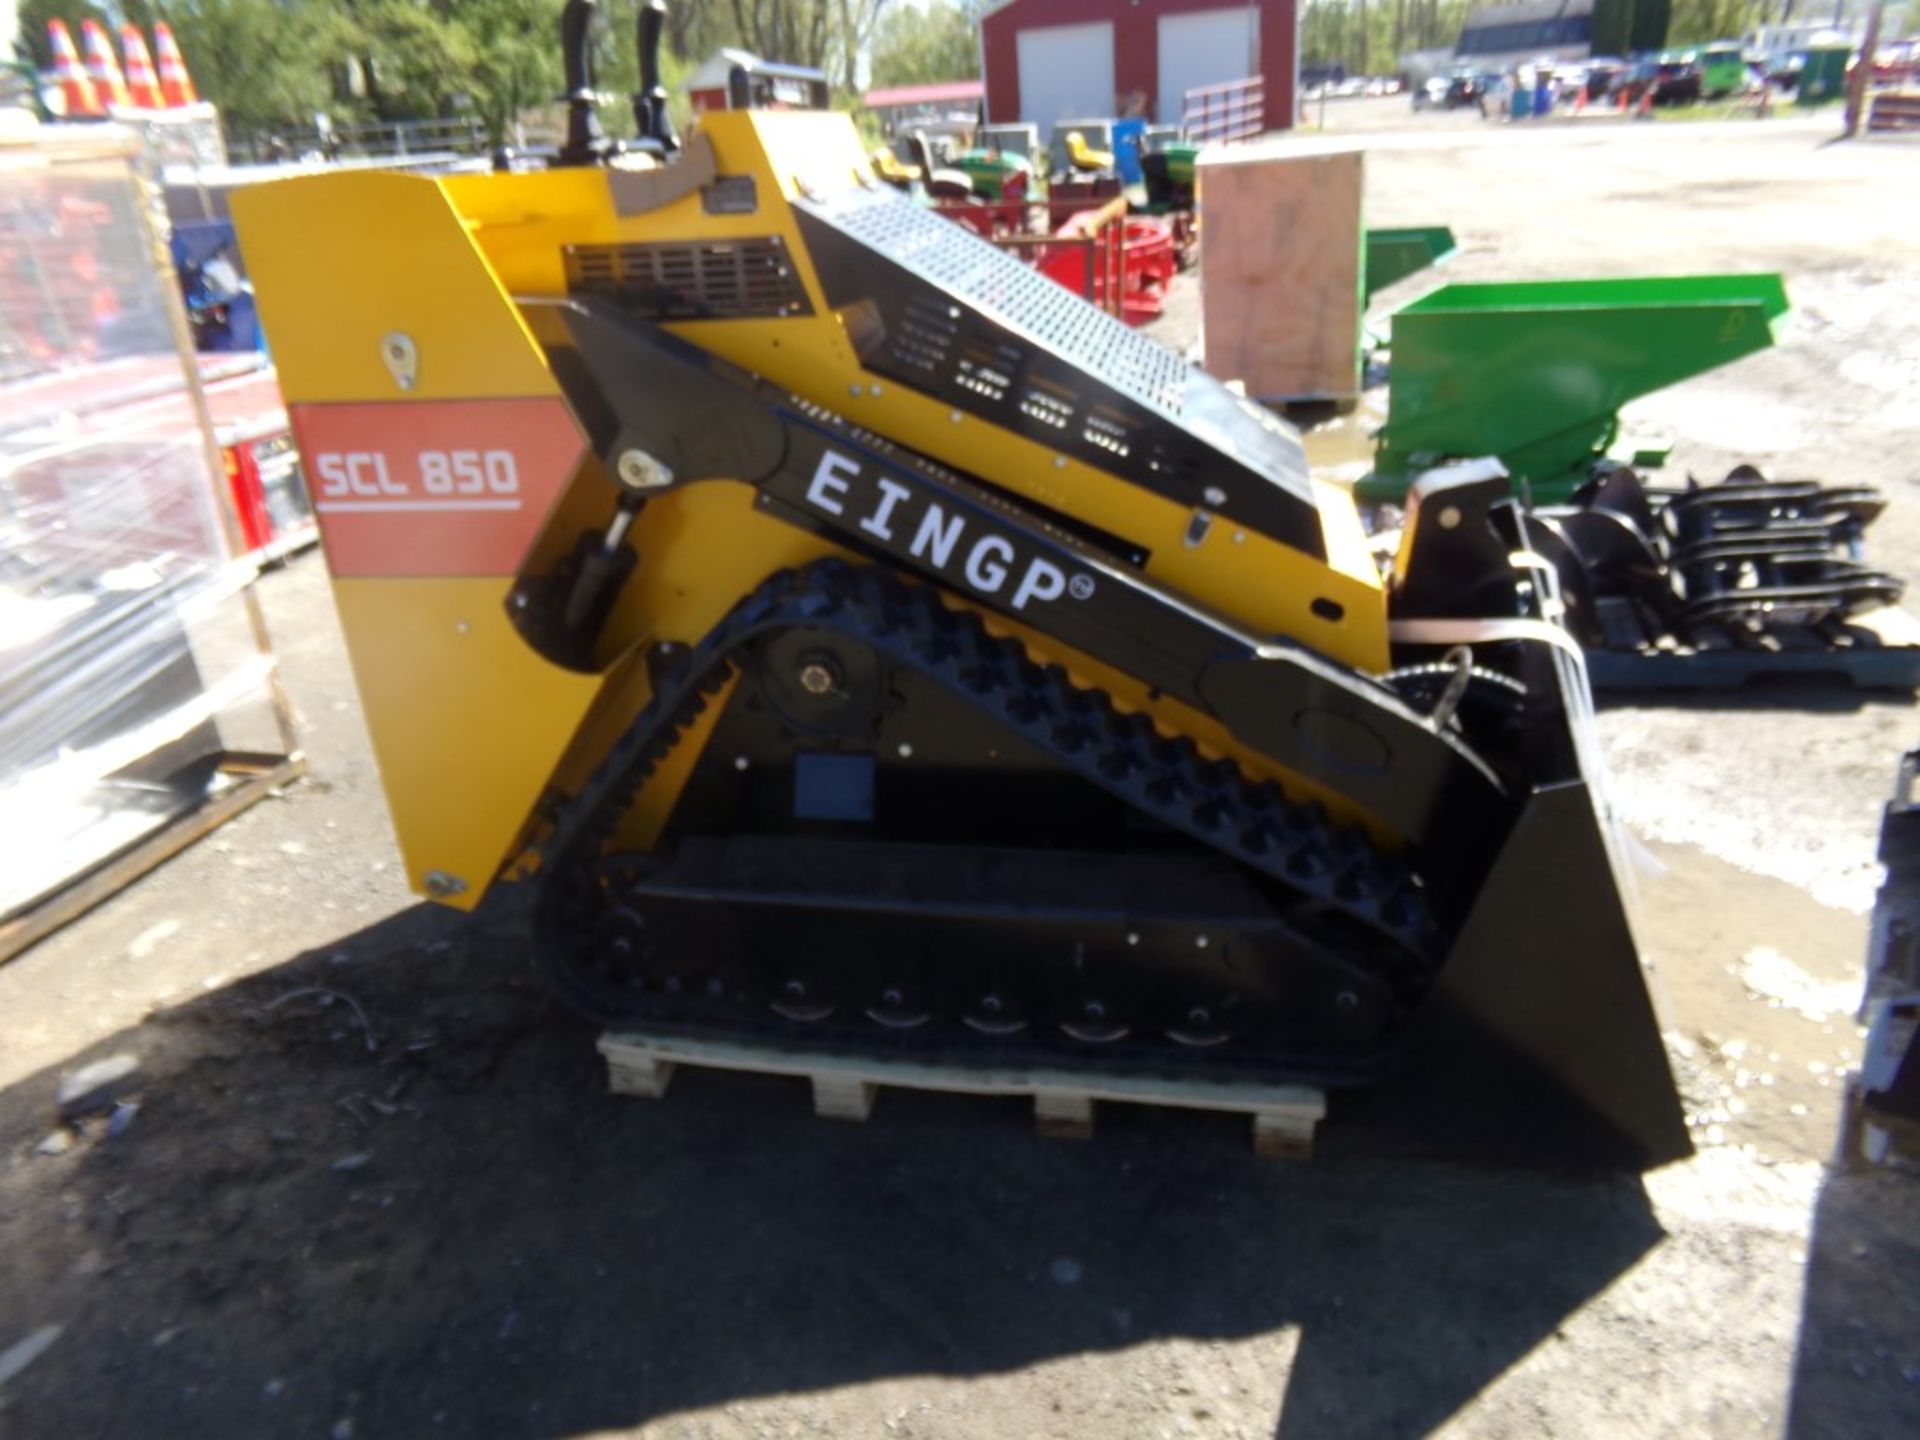 New Eingp SCL850 Mini Skid Steer with 40'' Bucket, Gas Engine, Yellow - Image 2 of 2